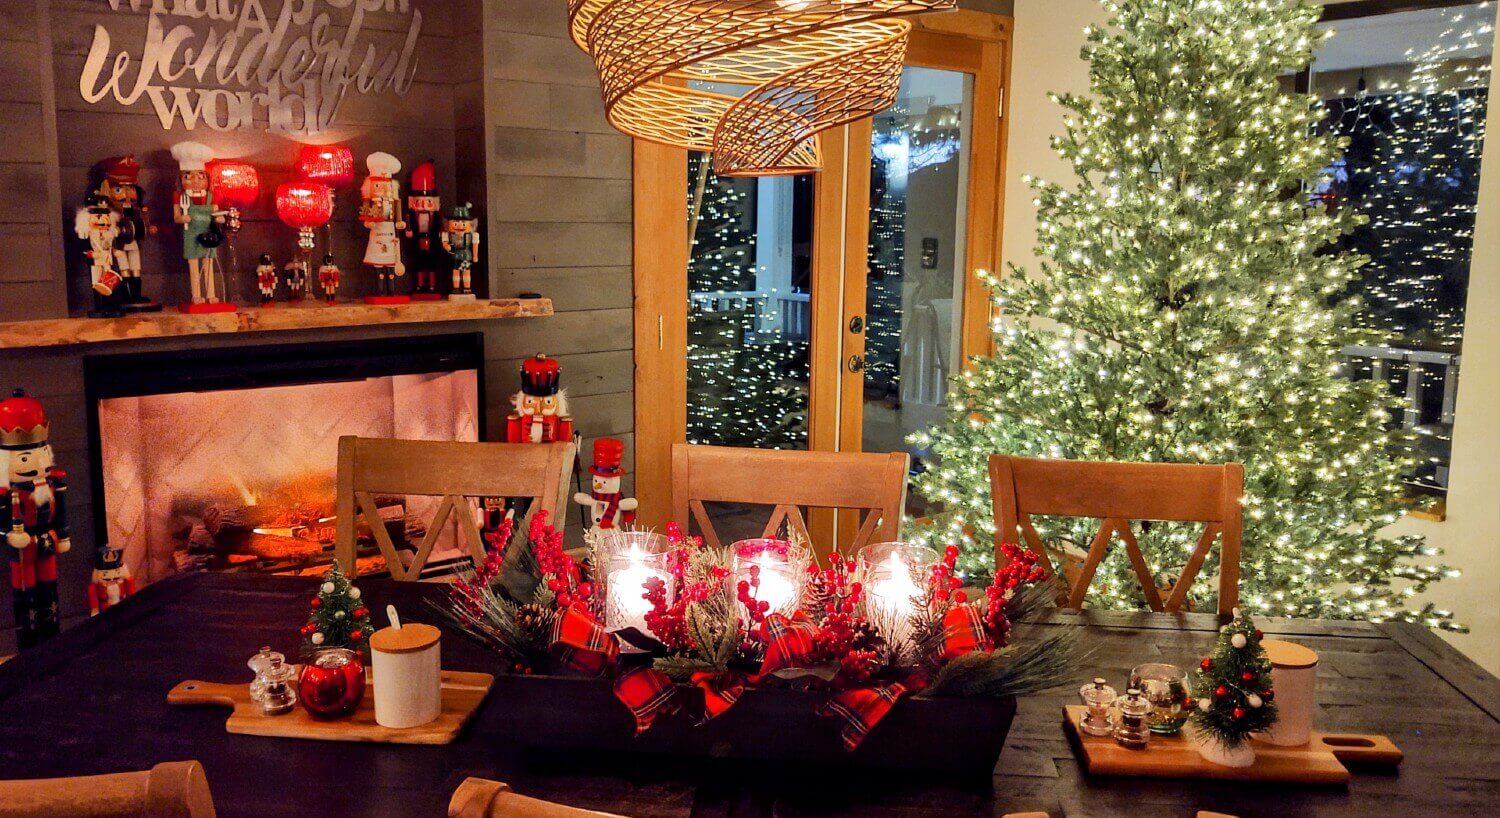 rectangular table set with Christmas decorations , mantel with nutcrackers above burning fire, Christmas tree with white lights